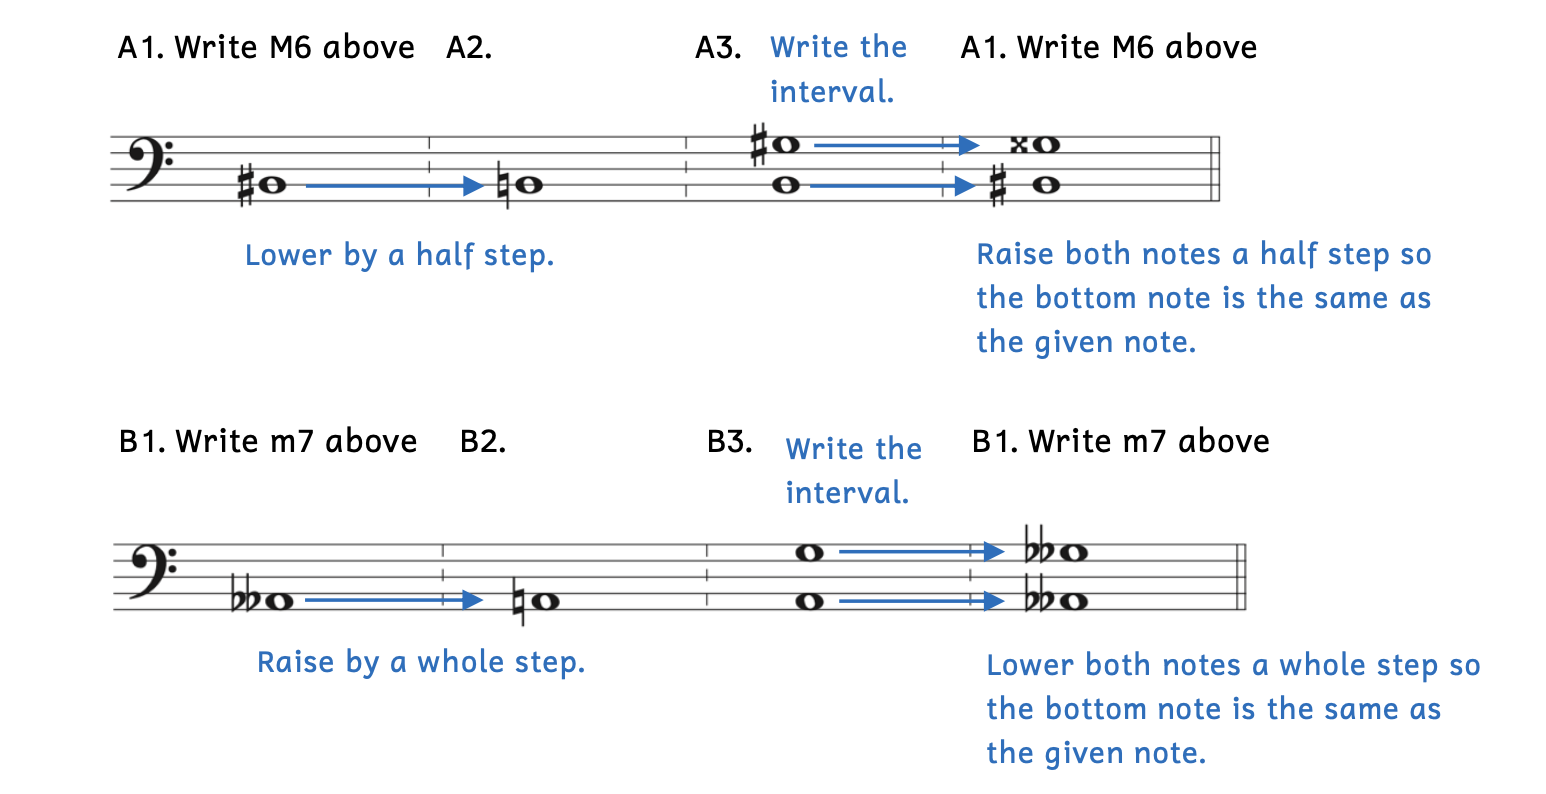 Example A1 asks for a major sixth above B-sharp. Example A2 shows that B-sharp is lowered by a half step to B. Example A3 shows a major sixth above B, which is G-sharp. Returning back to Example A1, B is raised by a half step to B-sharp and G-sharp is also raised by a half step to G-double sharp. Example B1 asks for a minor seventh above A-double flat. Example B2 shows that A-double flat is raised by a whole step to A-natural. Example B3 shows a minor seventh above A, which is G. Returning back to Example B1, A is lowered by a whole step to A-double flat and G is also lowered by a whole step to G-double flat.